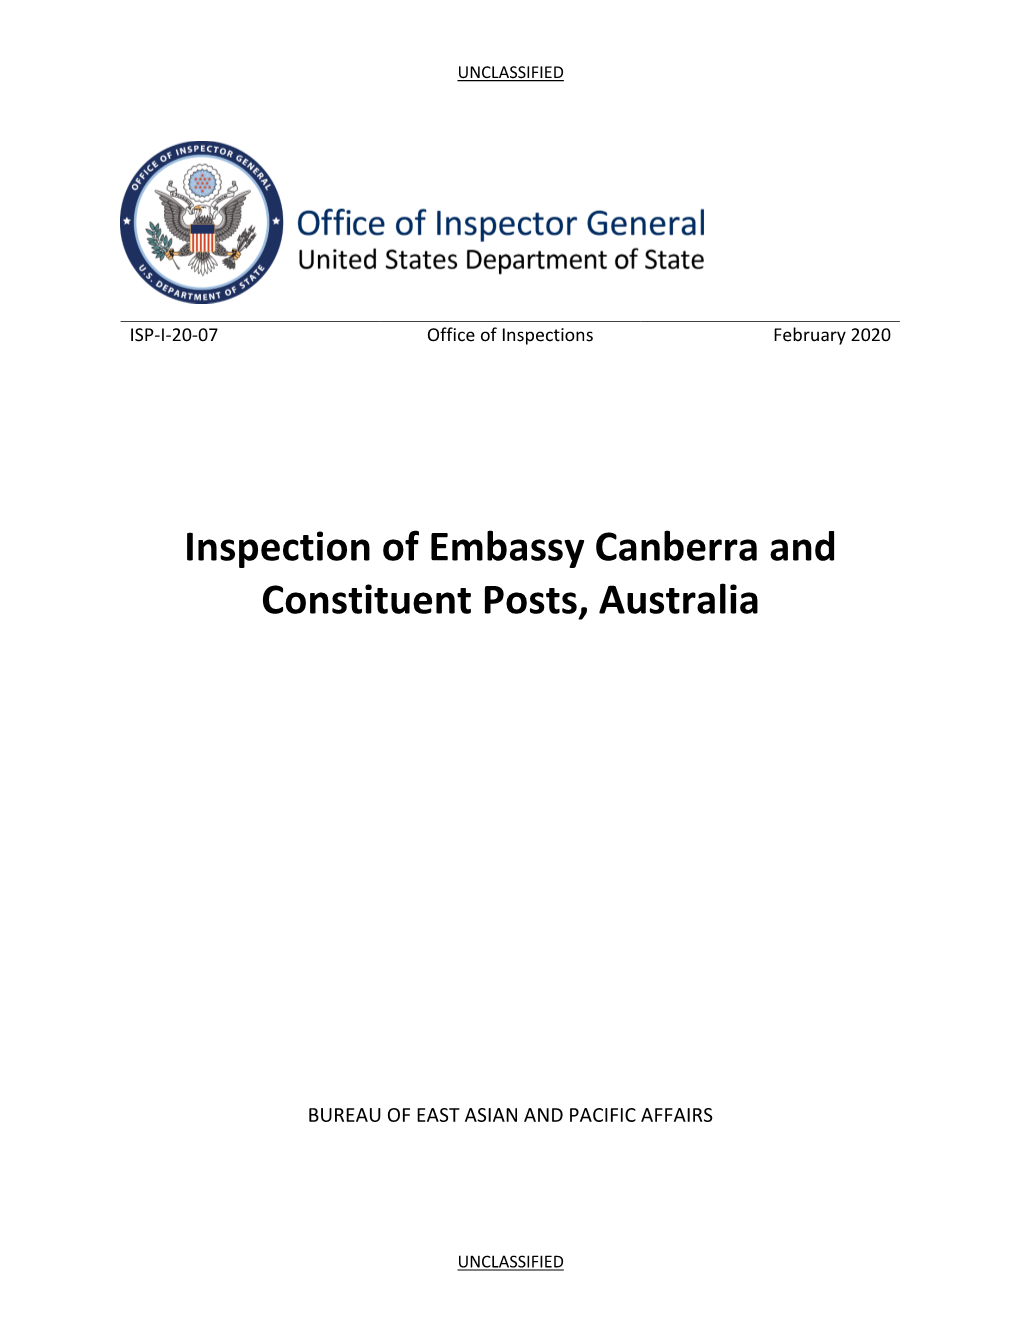 Inspection of Embassy Canberra and Constituent Posts, Australia, ISP-I